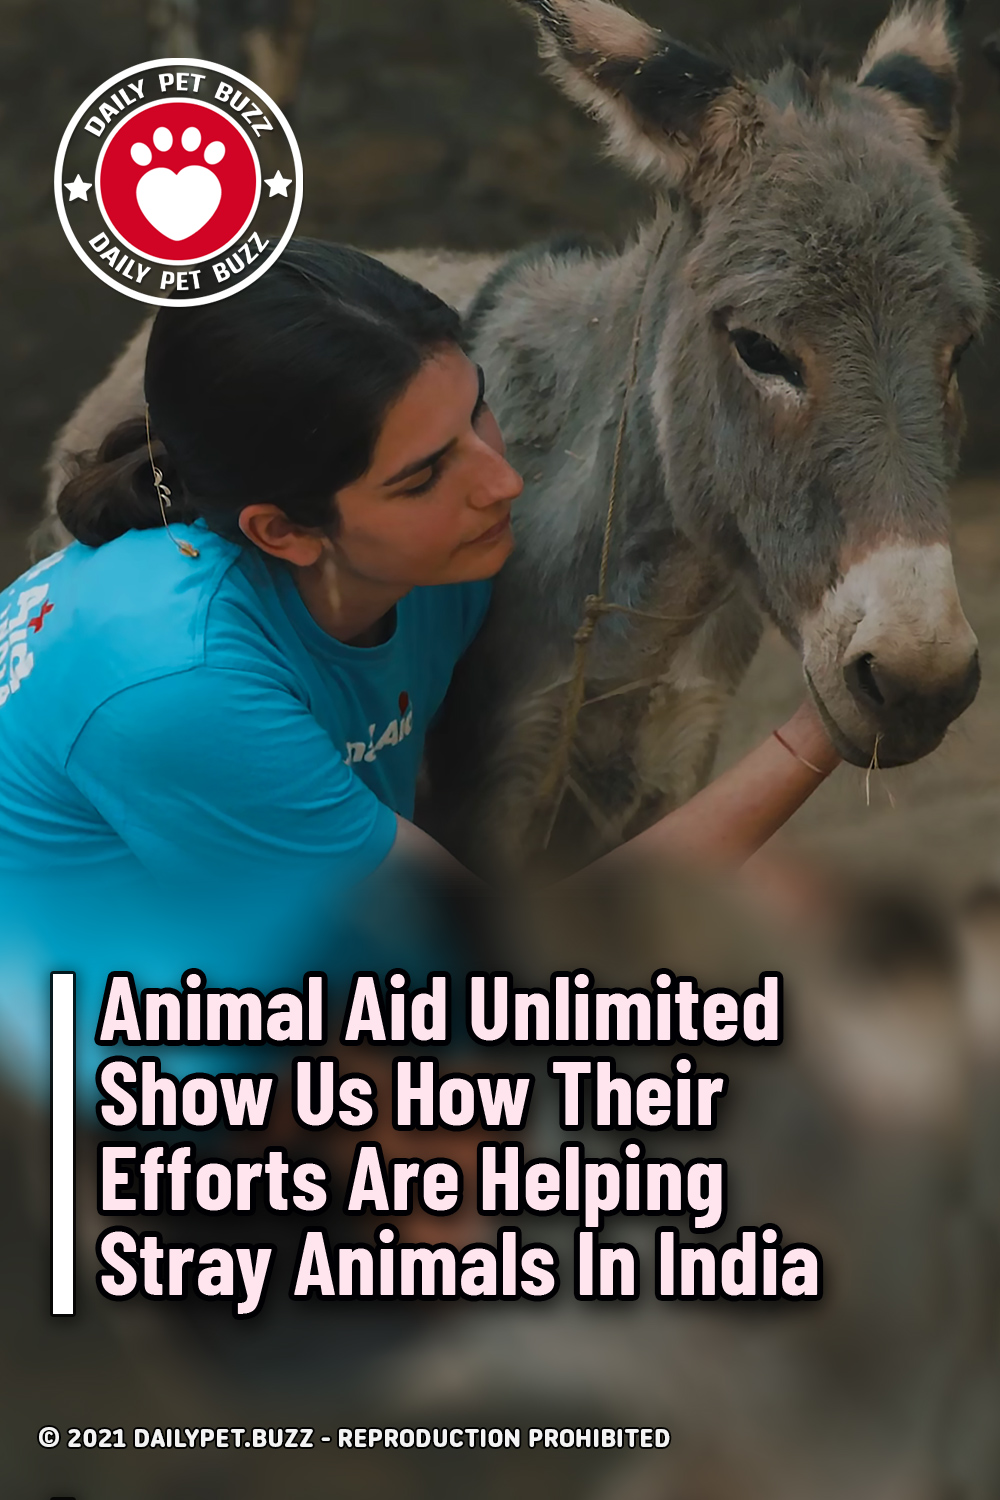 Animal Aid Unlimited Show Us How Their Efforts Are Helping Stray Animals In India